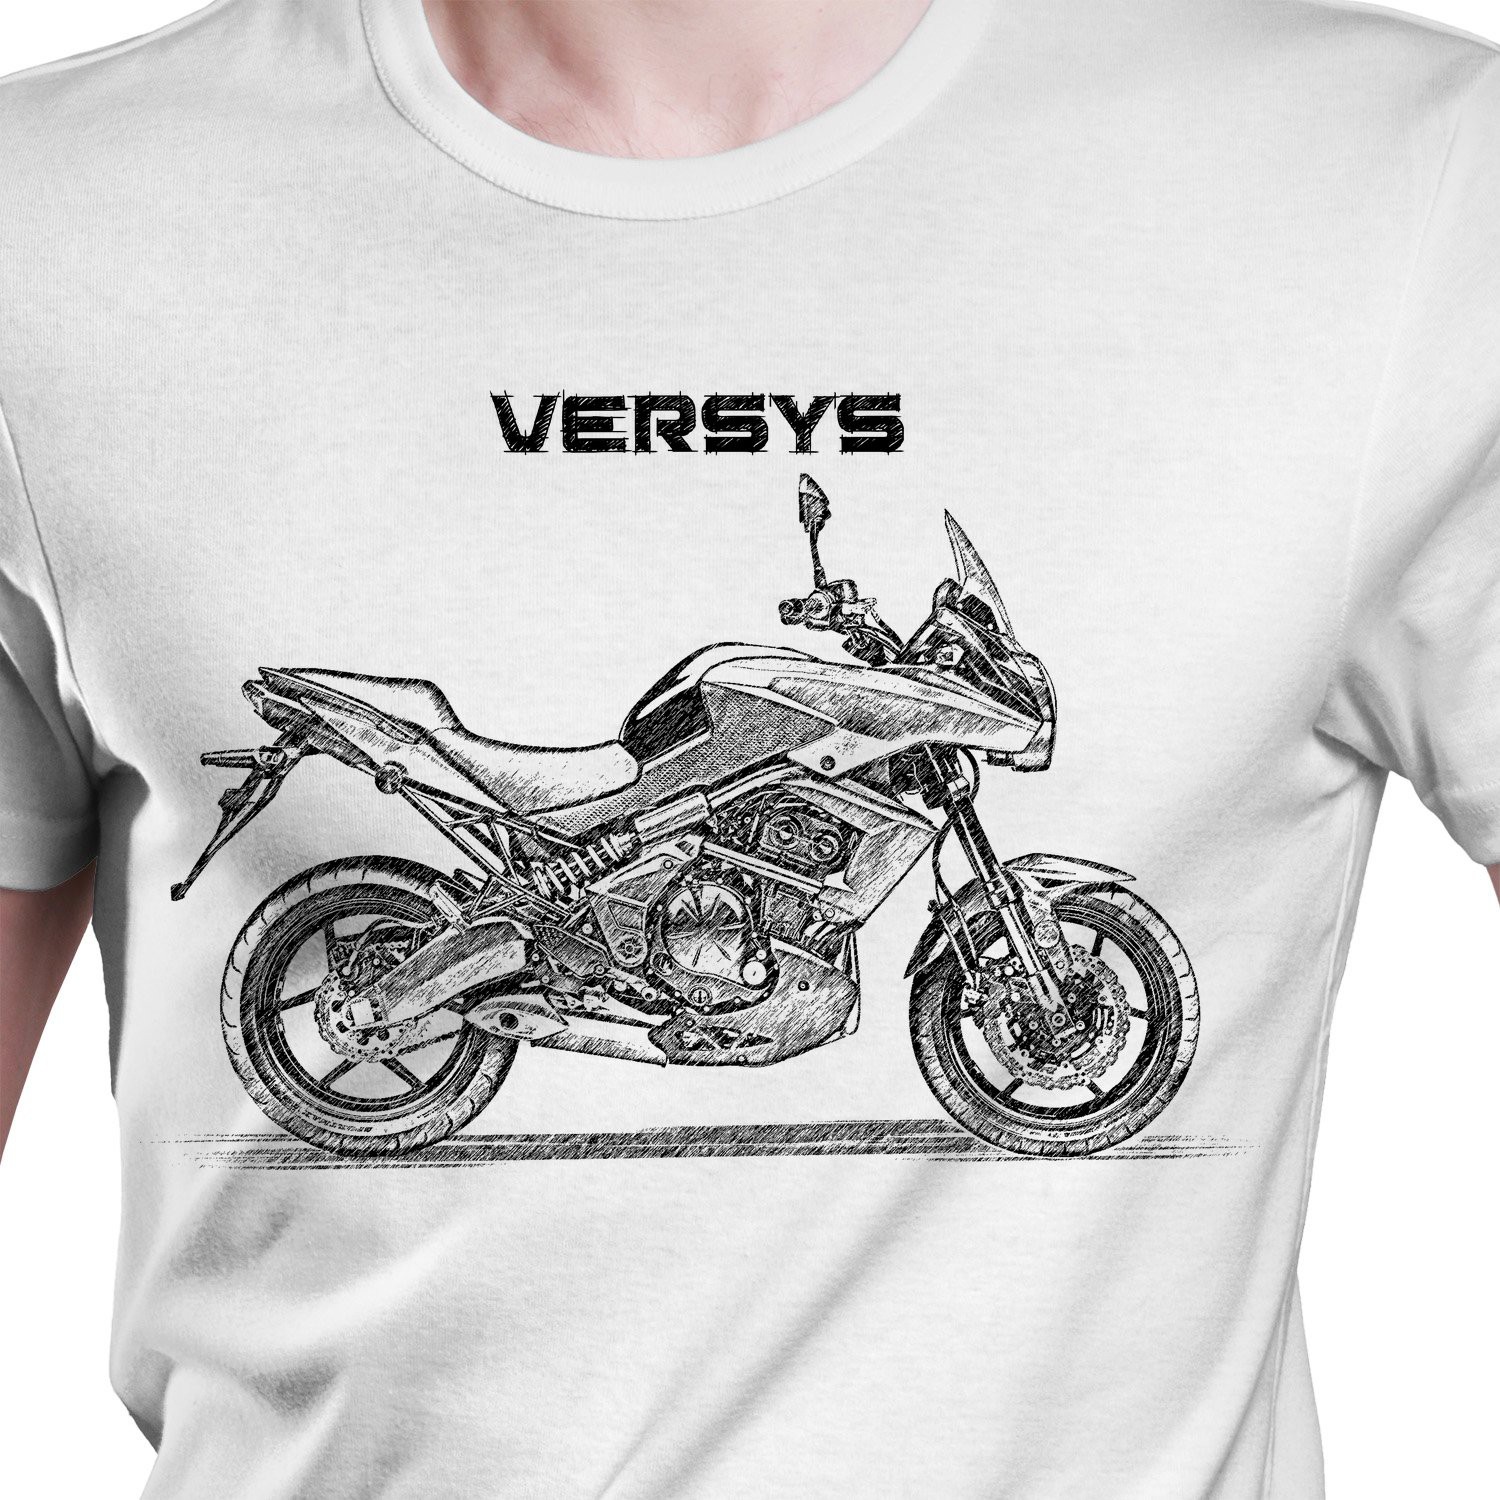 White T-shirt with Kawasaki Versys. Gift for motorcyclist.